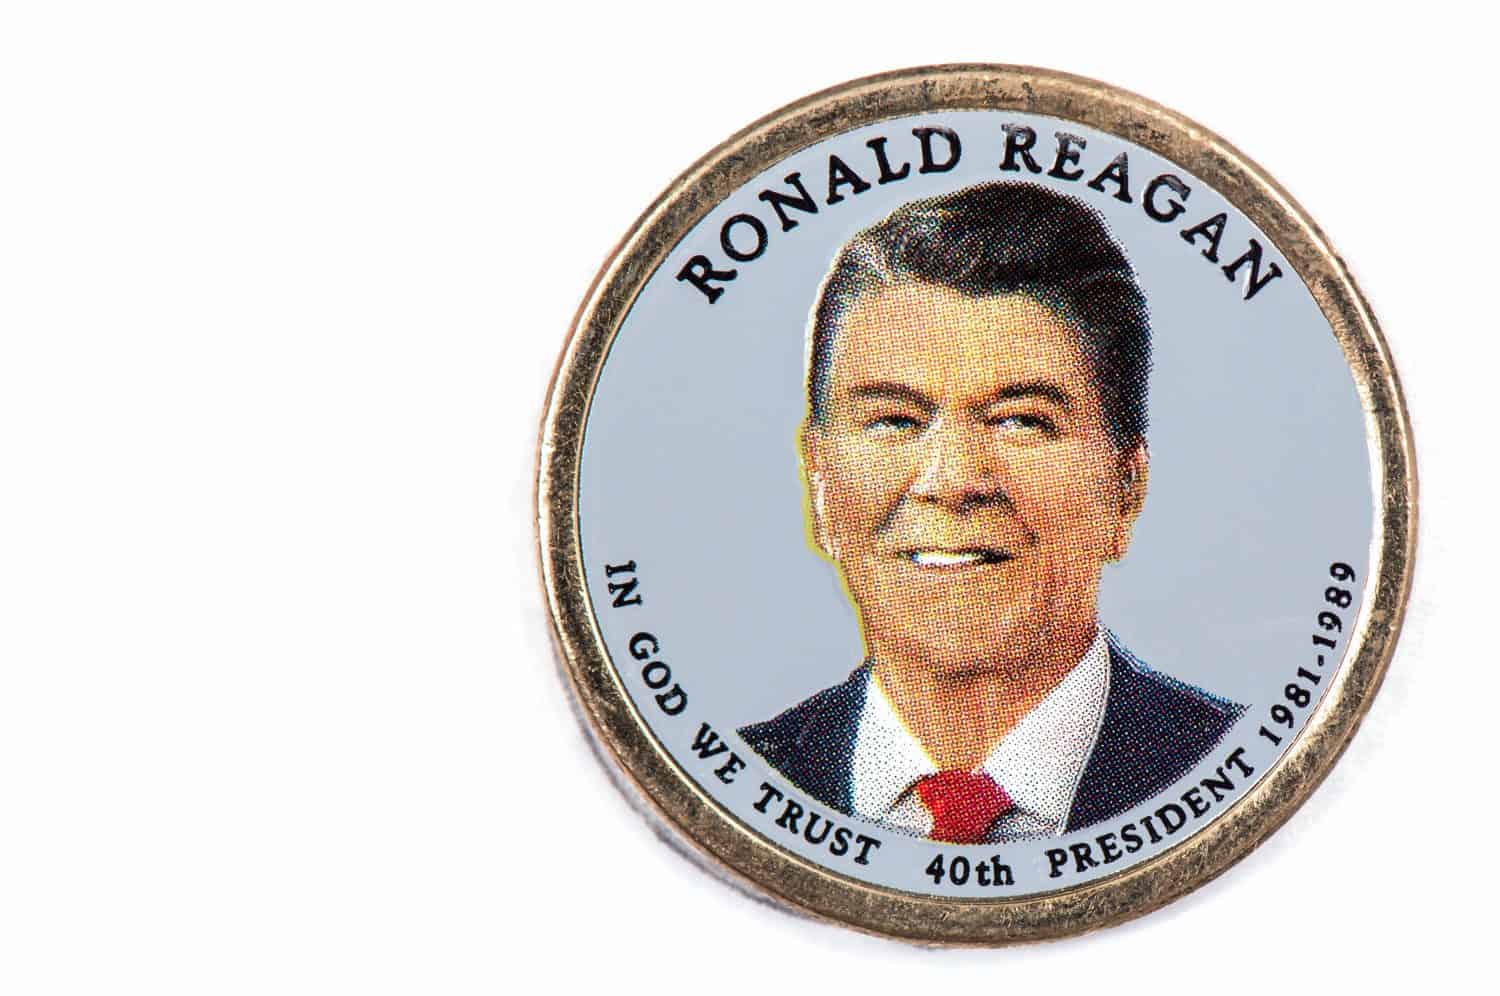 Ronald Reagan Presidential Dollar, USA coin a portrait image of RONALD REAGAN IN GOD WE TRUST 40th PRESIDENT 1974-1977, $1 United State of America, Close Up UNC Uncirculated - Collection